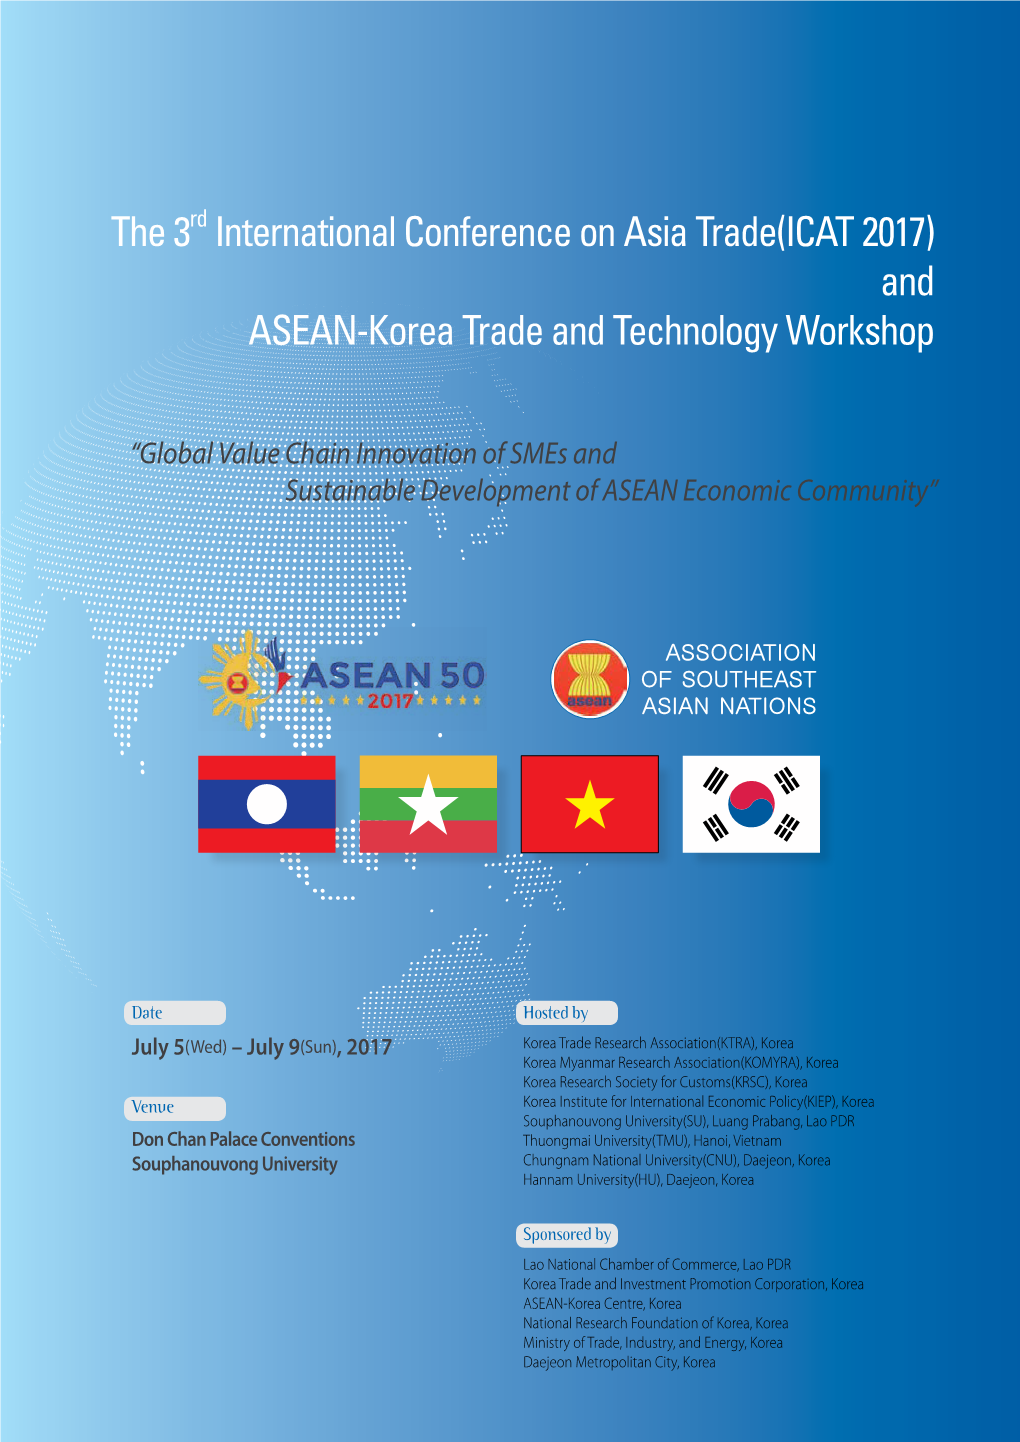 And ASEAN-Korea Trade and Technology Workshop